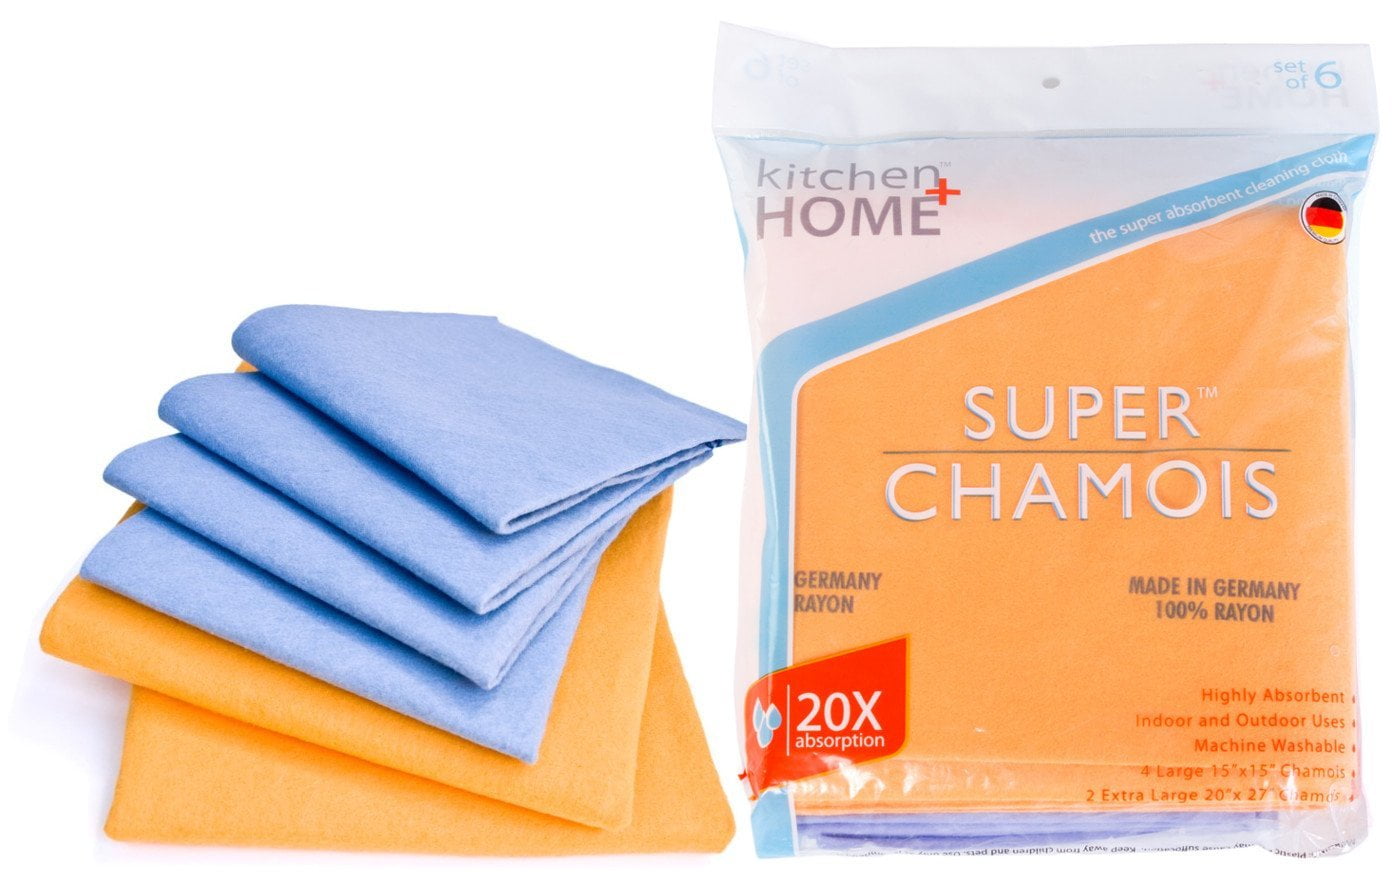 Large Super Absorbent Multi-Purpose Cleaning Shammy 27.5"x19.5" in 